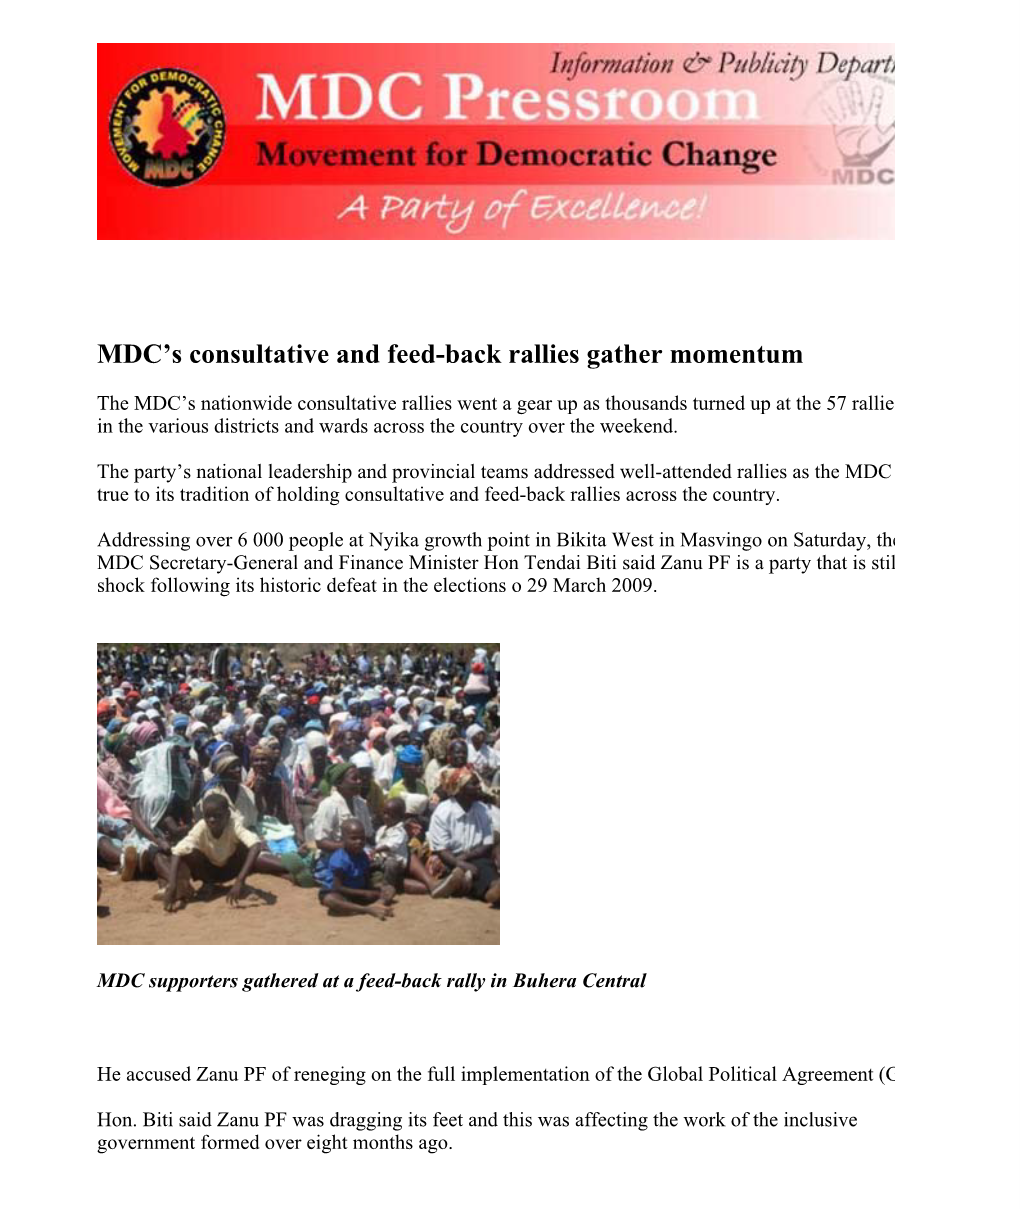 MDC's Consultative and Feed-Back Rallies Gather Momentum